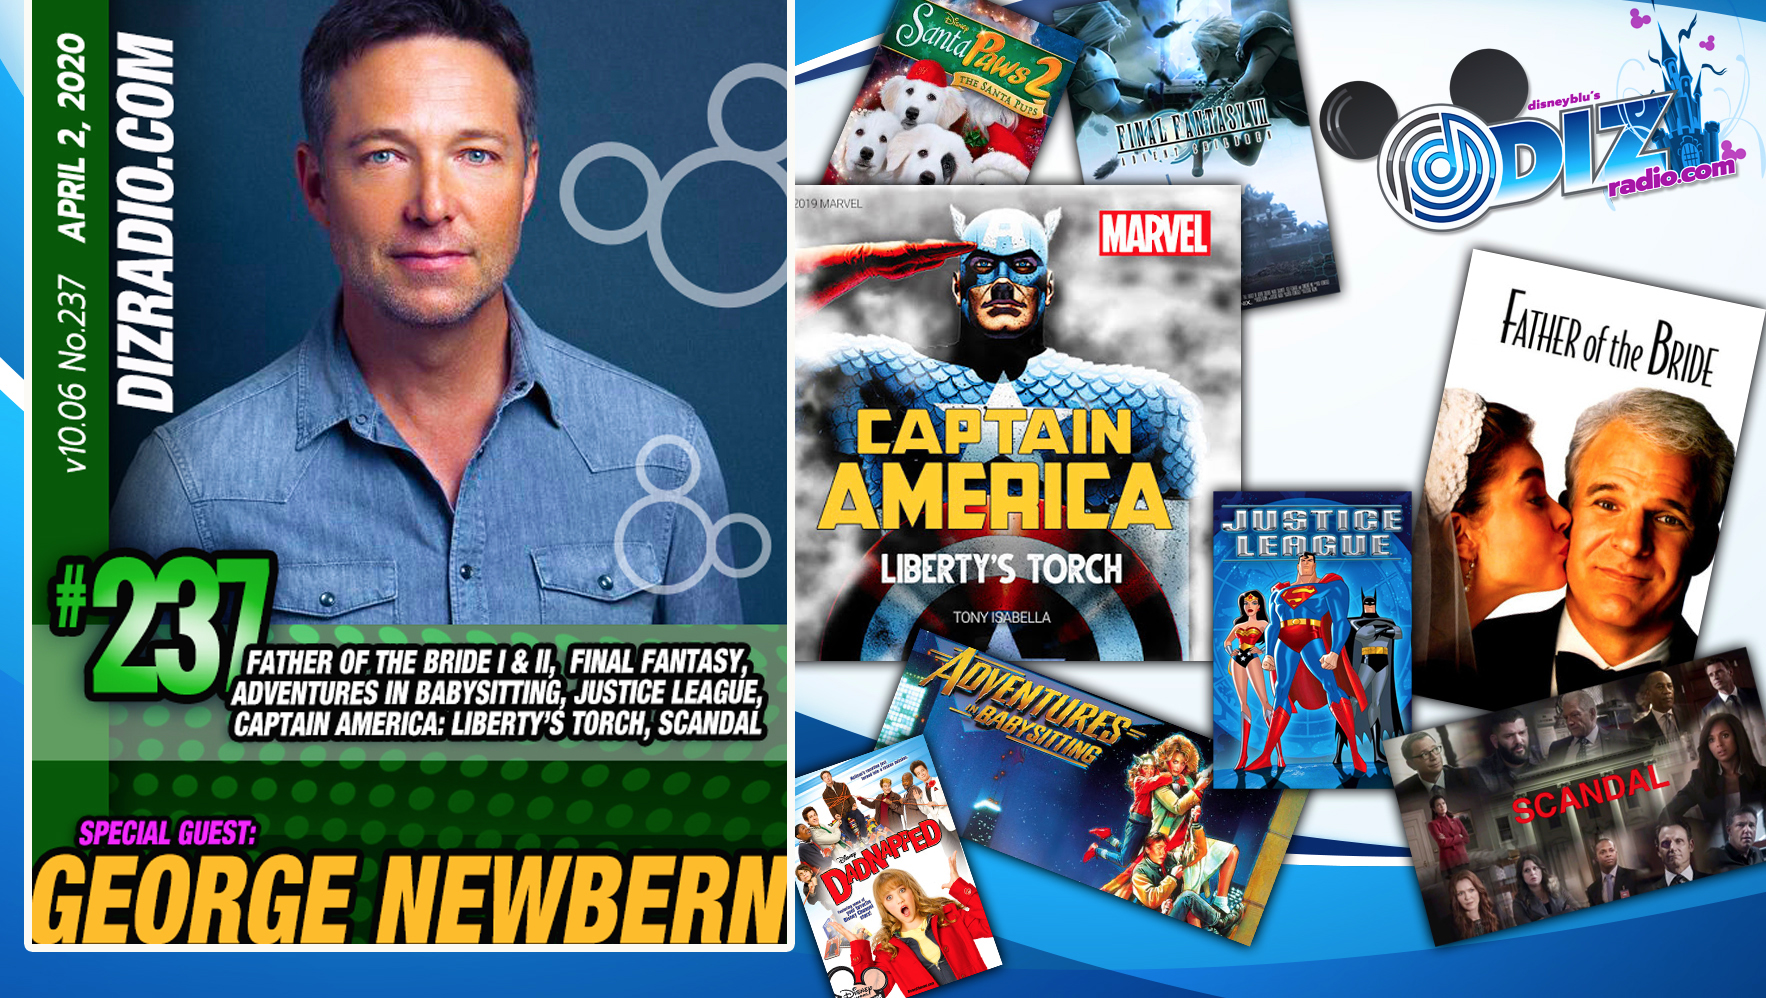 DisneyBlu's DizRadio Show #237 w/ Guest GEORGE NEWBERN (Adventures in Babysitting, Father of the Bride, Father of the Bride 2, Scandal, Friends, Justice League, Dadnapped, Injustice, Captain America Liberty's Torch and more)